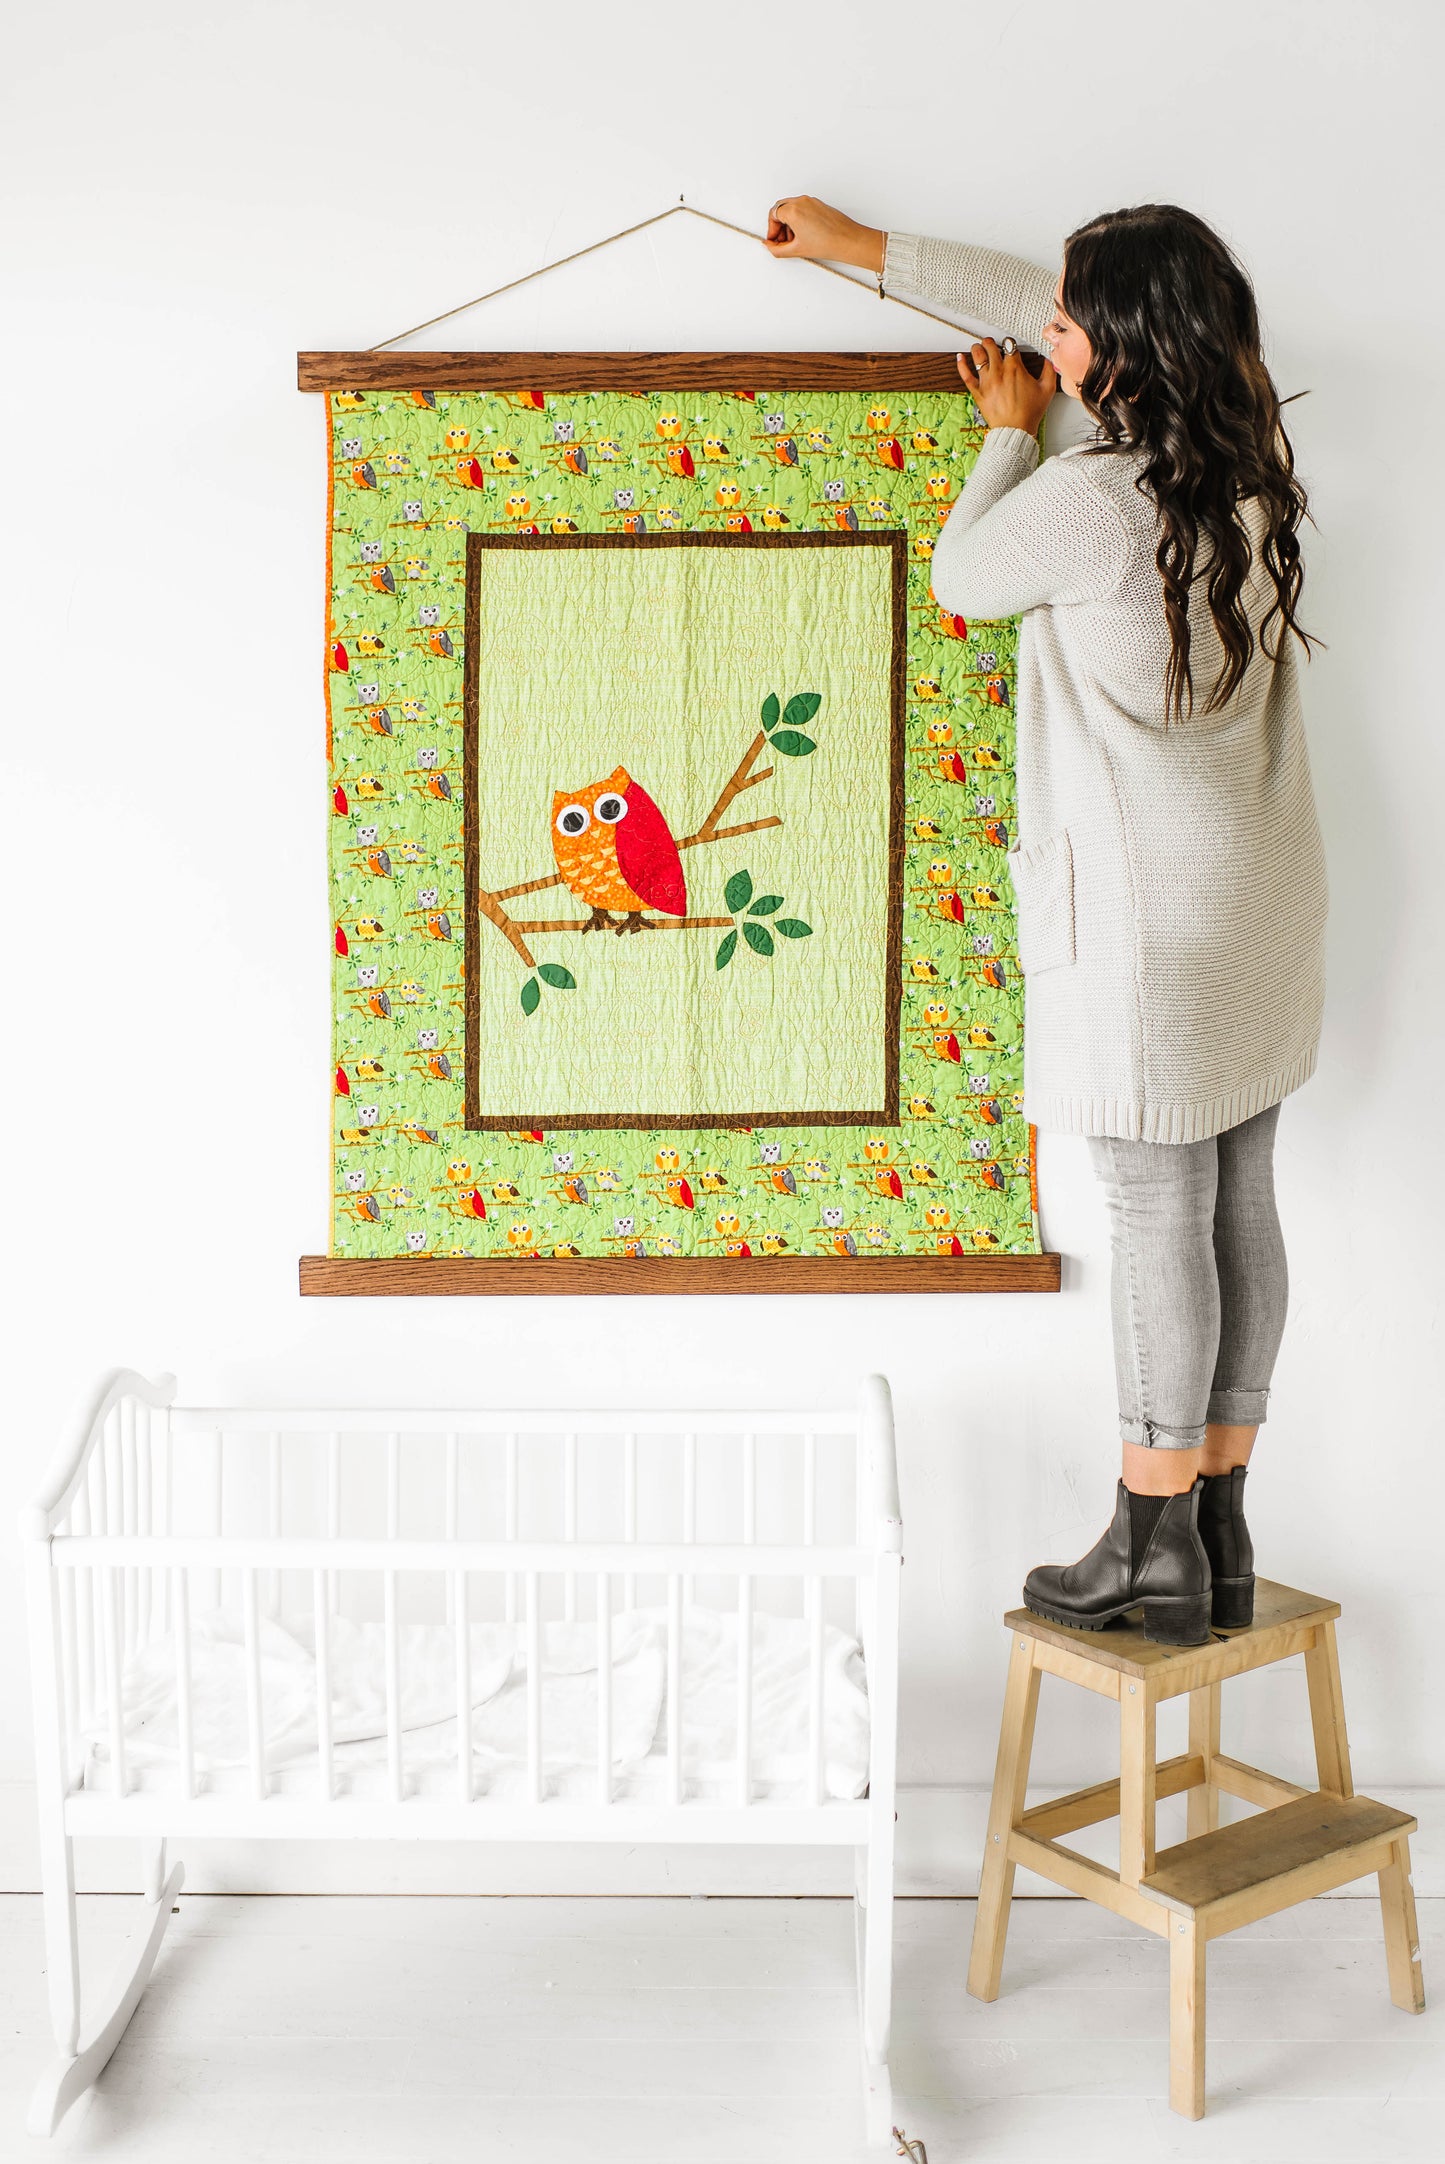 How to hang a baby quilt